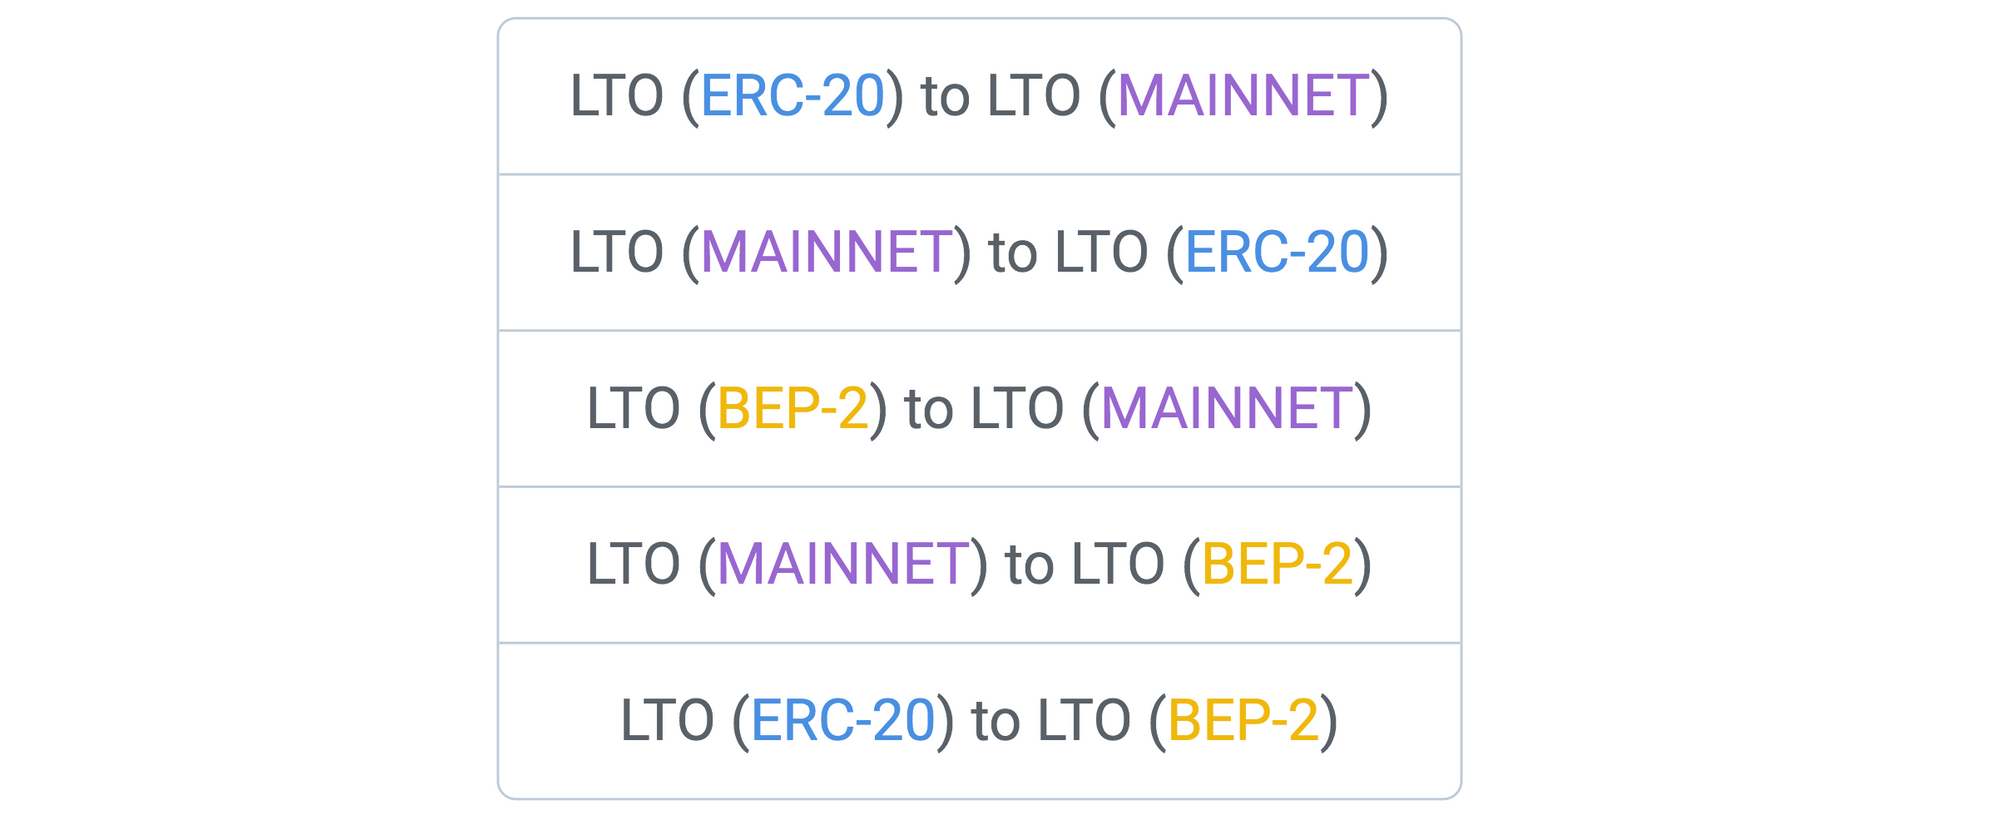 LTO Network x Binance Chain. Our vision and next steps.